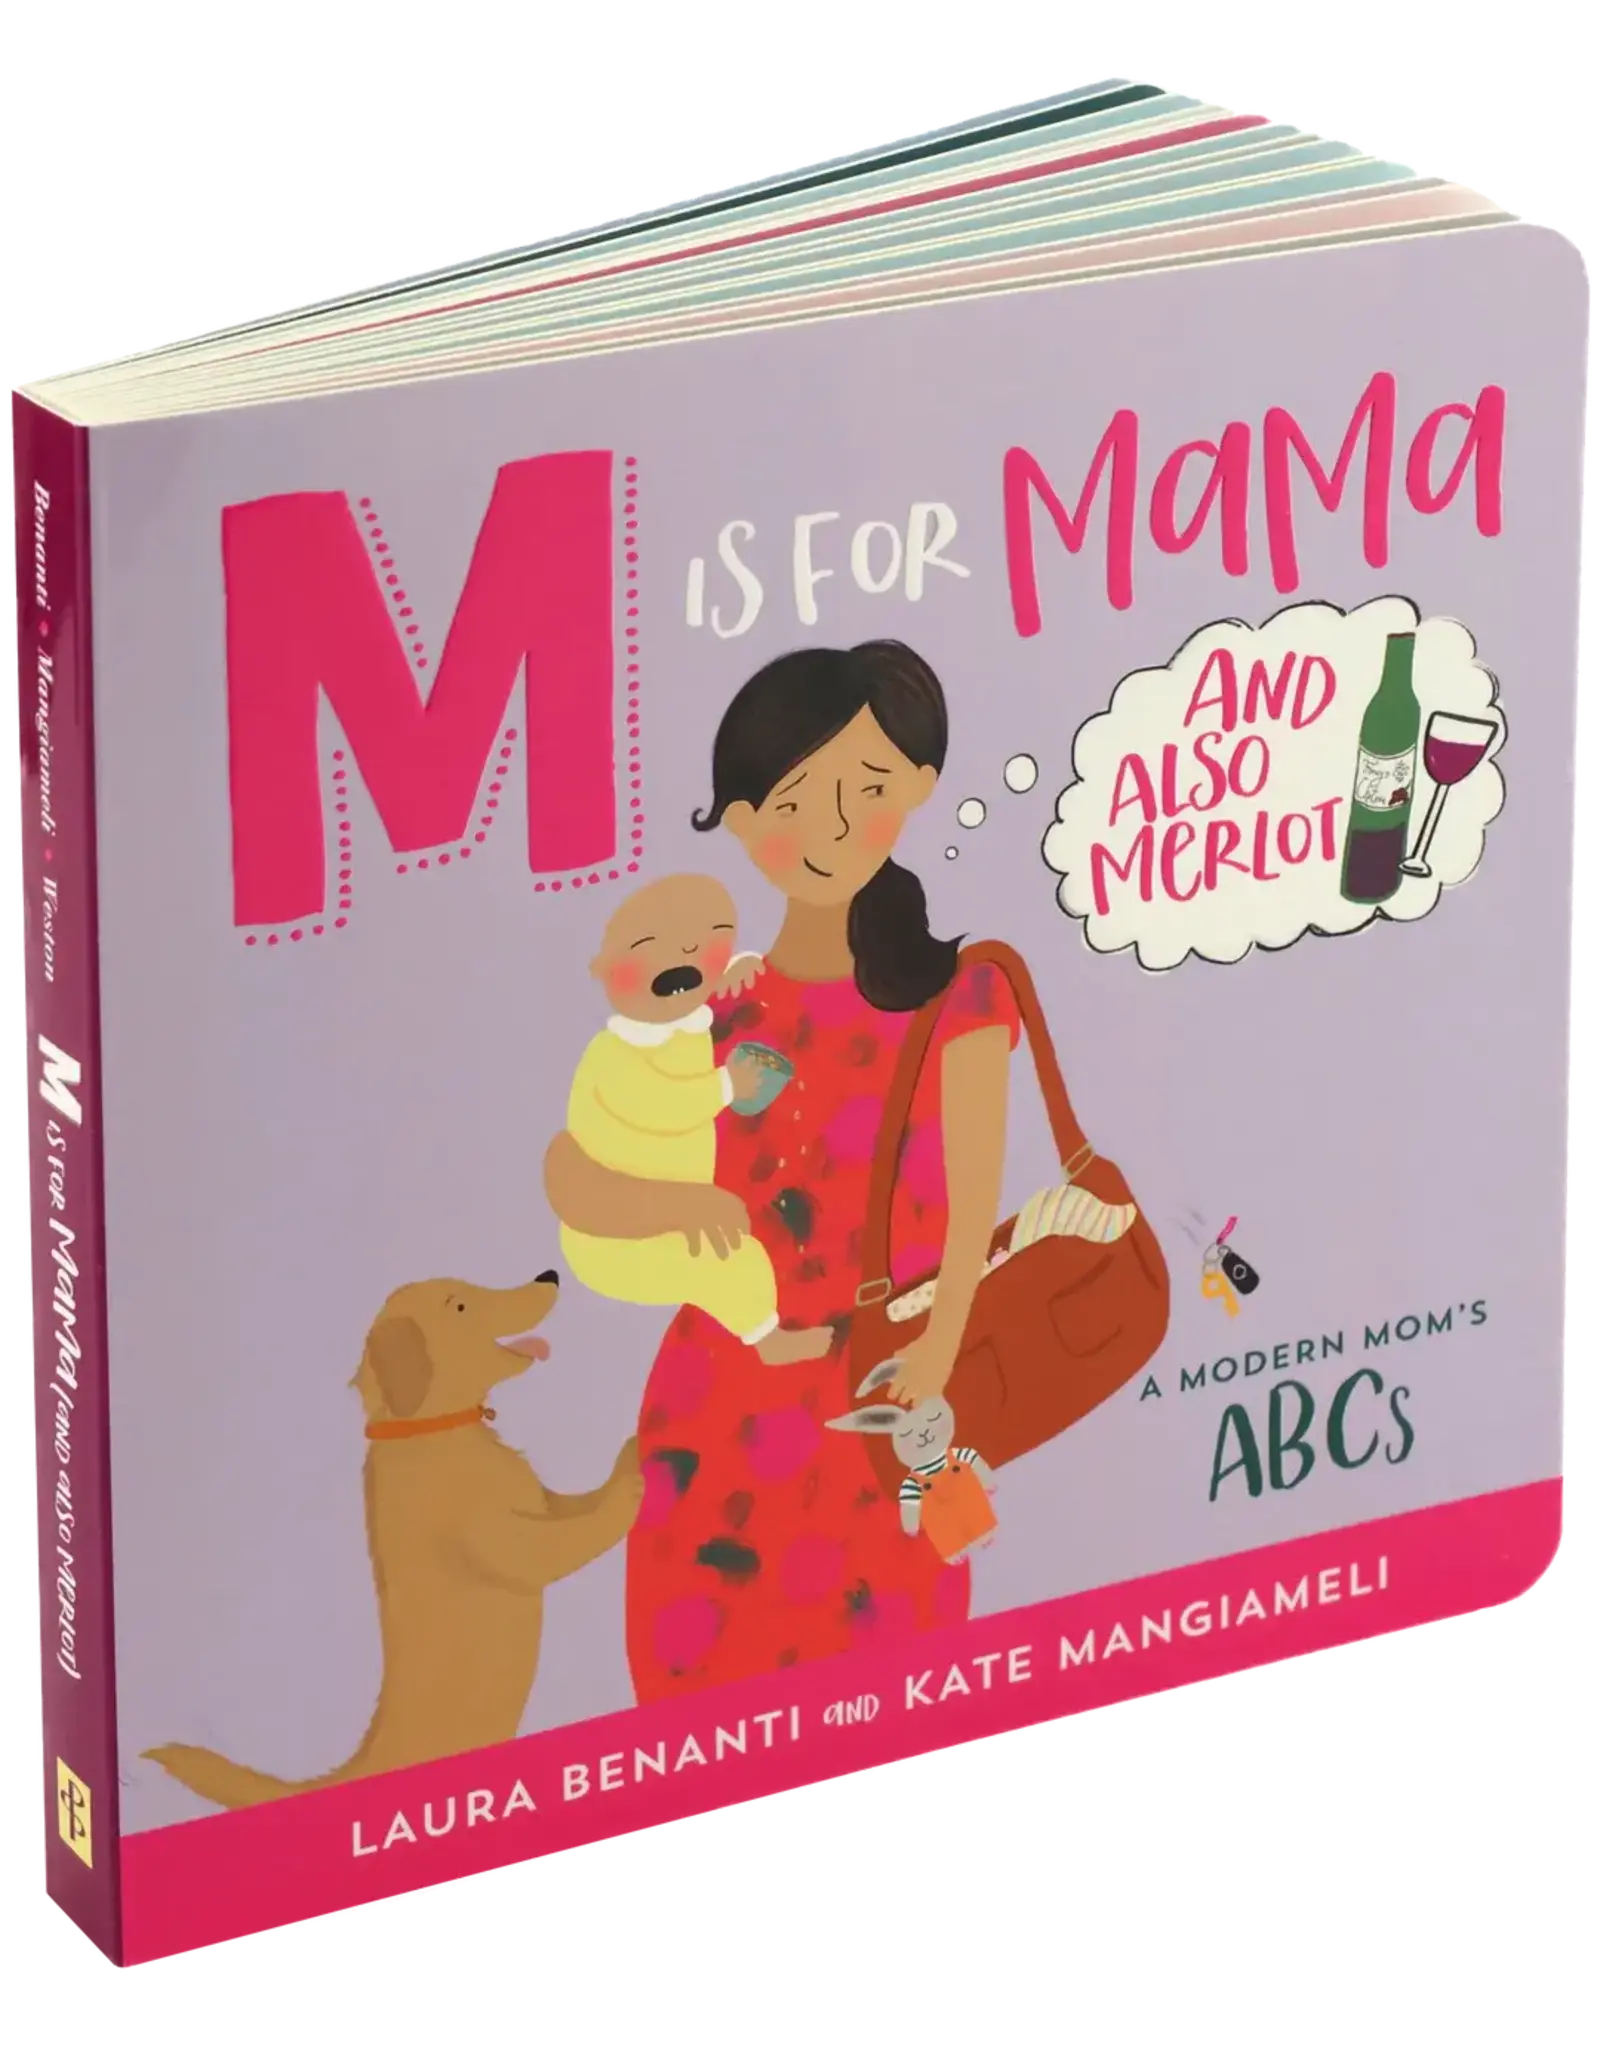 Peter Pauper Press M is for MAMA (and also Merlot): A Modern Mom's ABCs